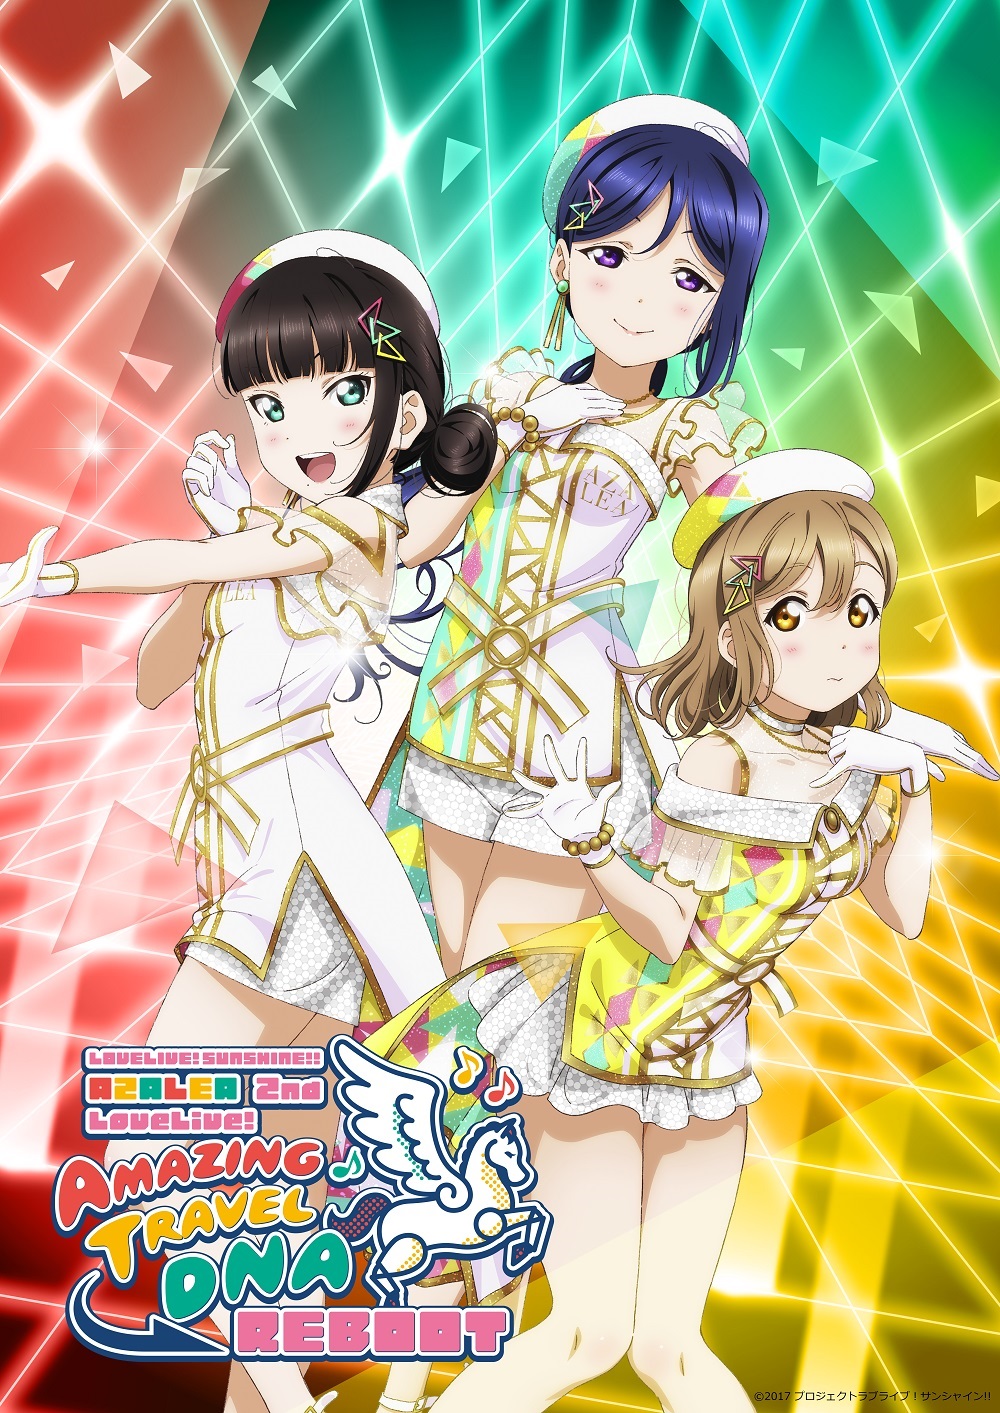 Streaming+] Love Live!Sunshine!! Azalea 2Nd Lovelive! ～Amazing Travel Dna  Reboot～ [Go To Event] Verified Tickets | Eplus - Japan Most Famous Ticket  Provider